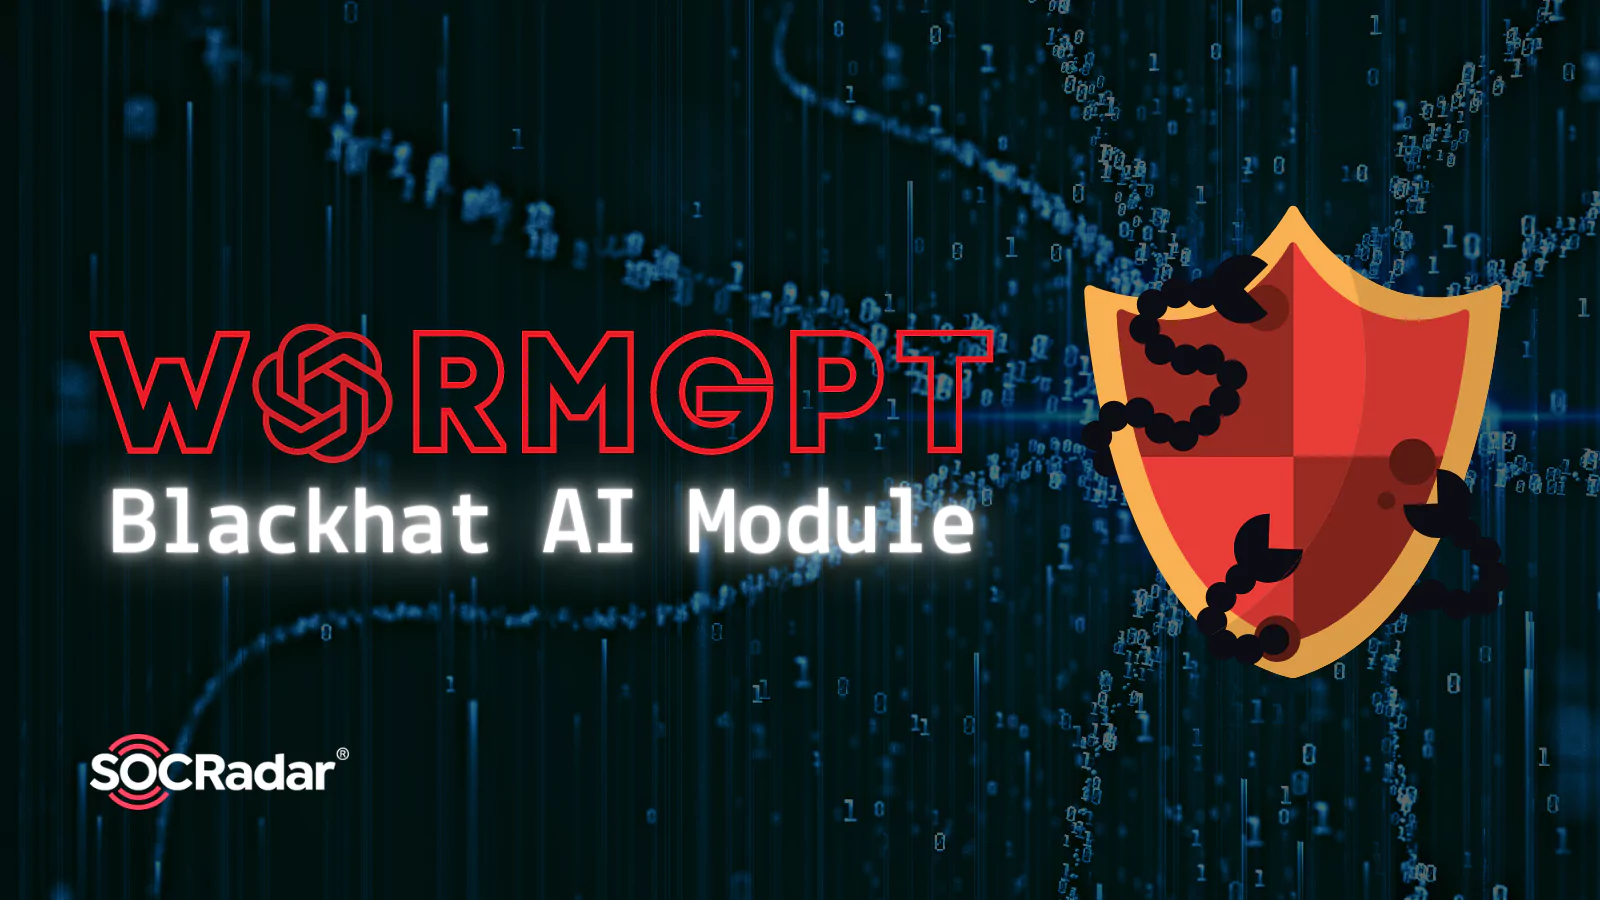 SOCRadar® Cyber Intelligence Inc. | WormGPT: Blackhat AI Module Surges to 5,000 Subscribers in Just Few Days